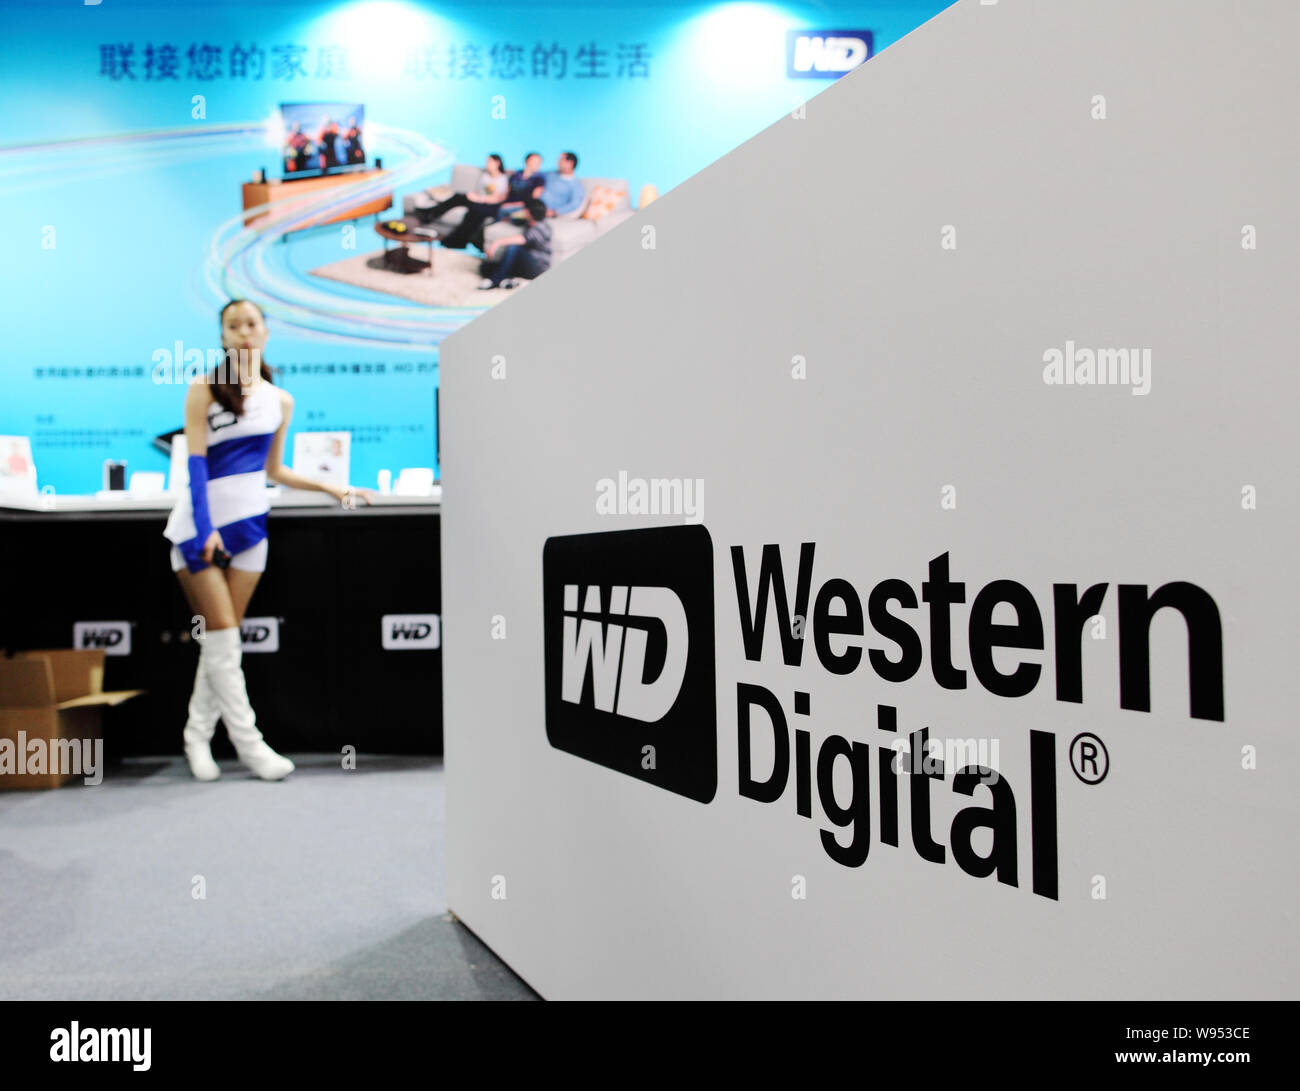 A model is seen at the stand of Western Digital during the 2012 Macworld iWorld Expo in Beijing, China, 2 August 2012.   The 2012 Macworld iWorld Expo Stock Photo